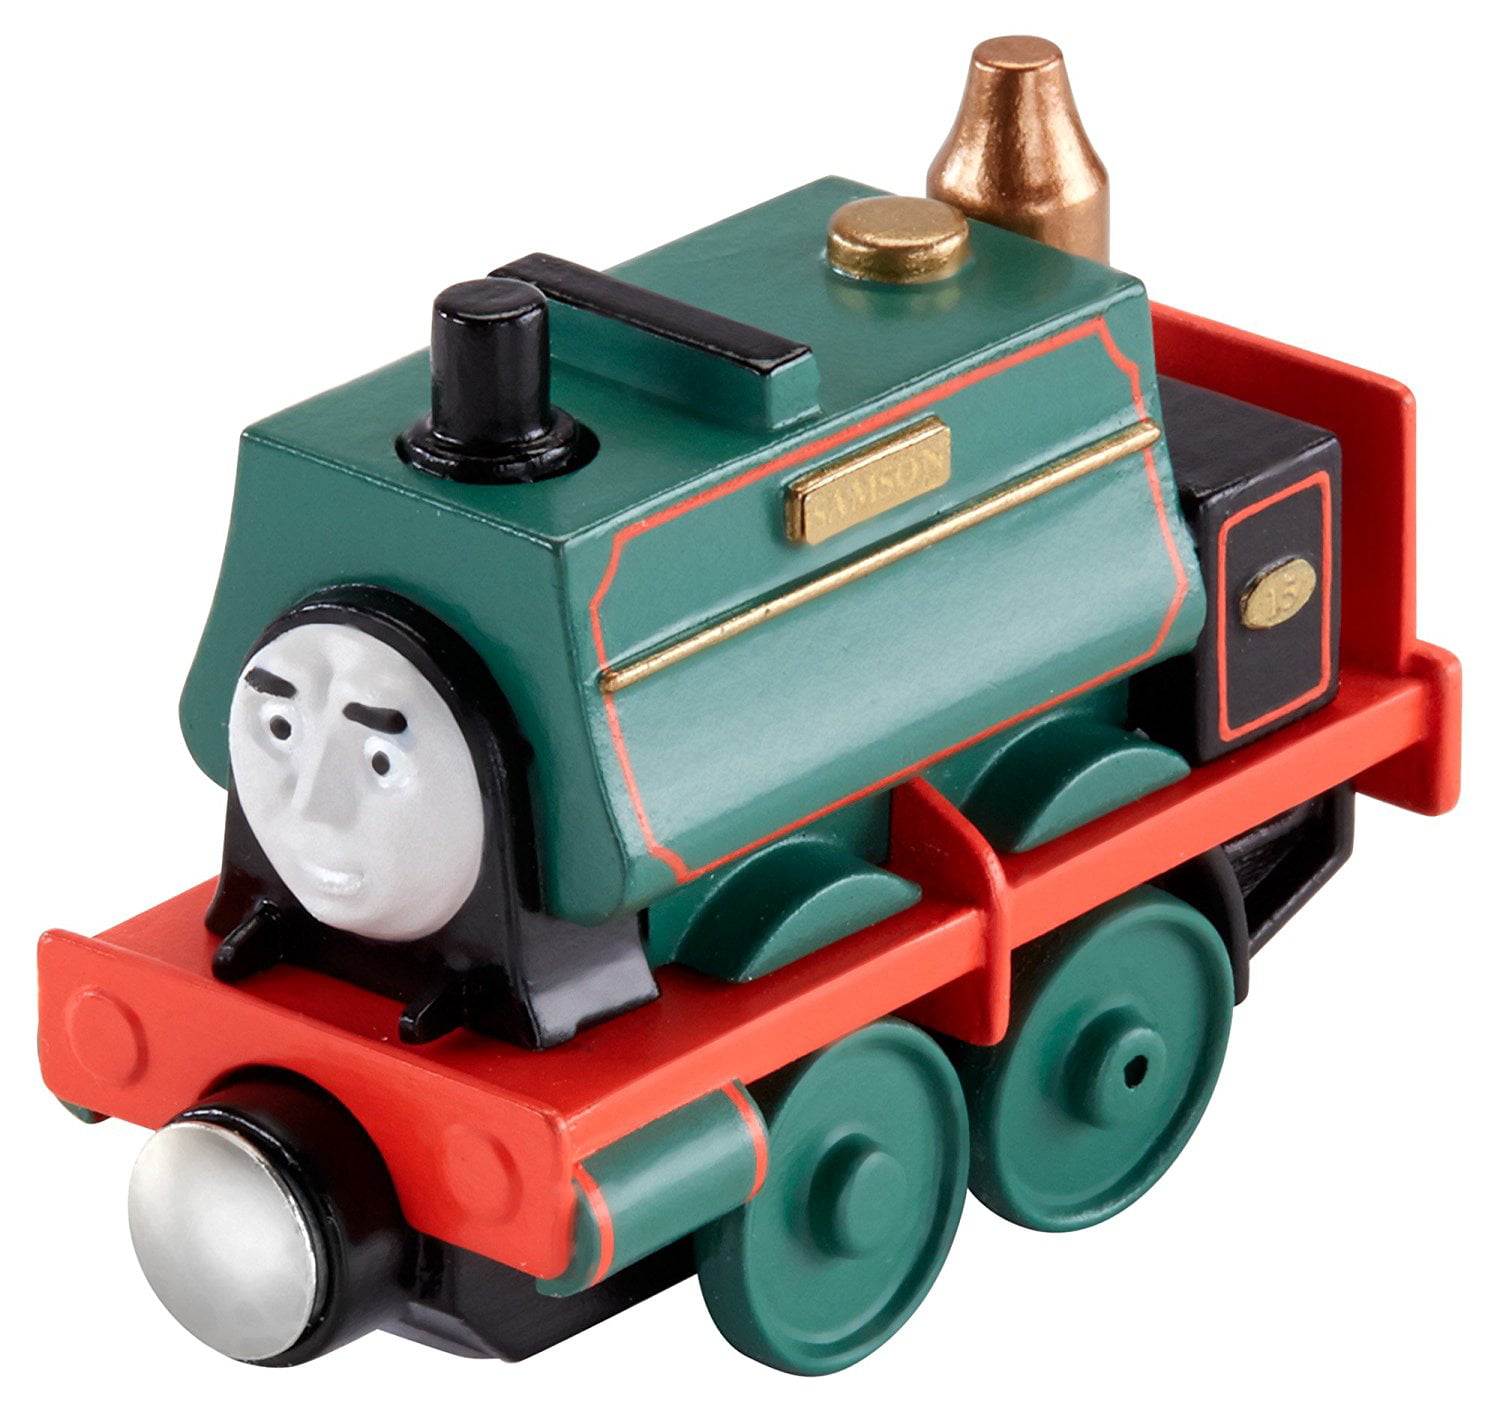 Fisher Price Thomas & Friends Take N Play Die Cast Train Engines 